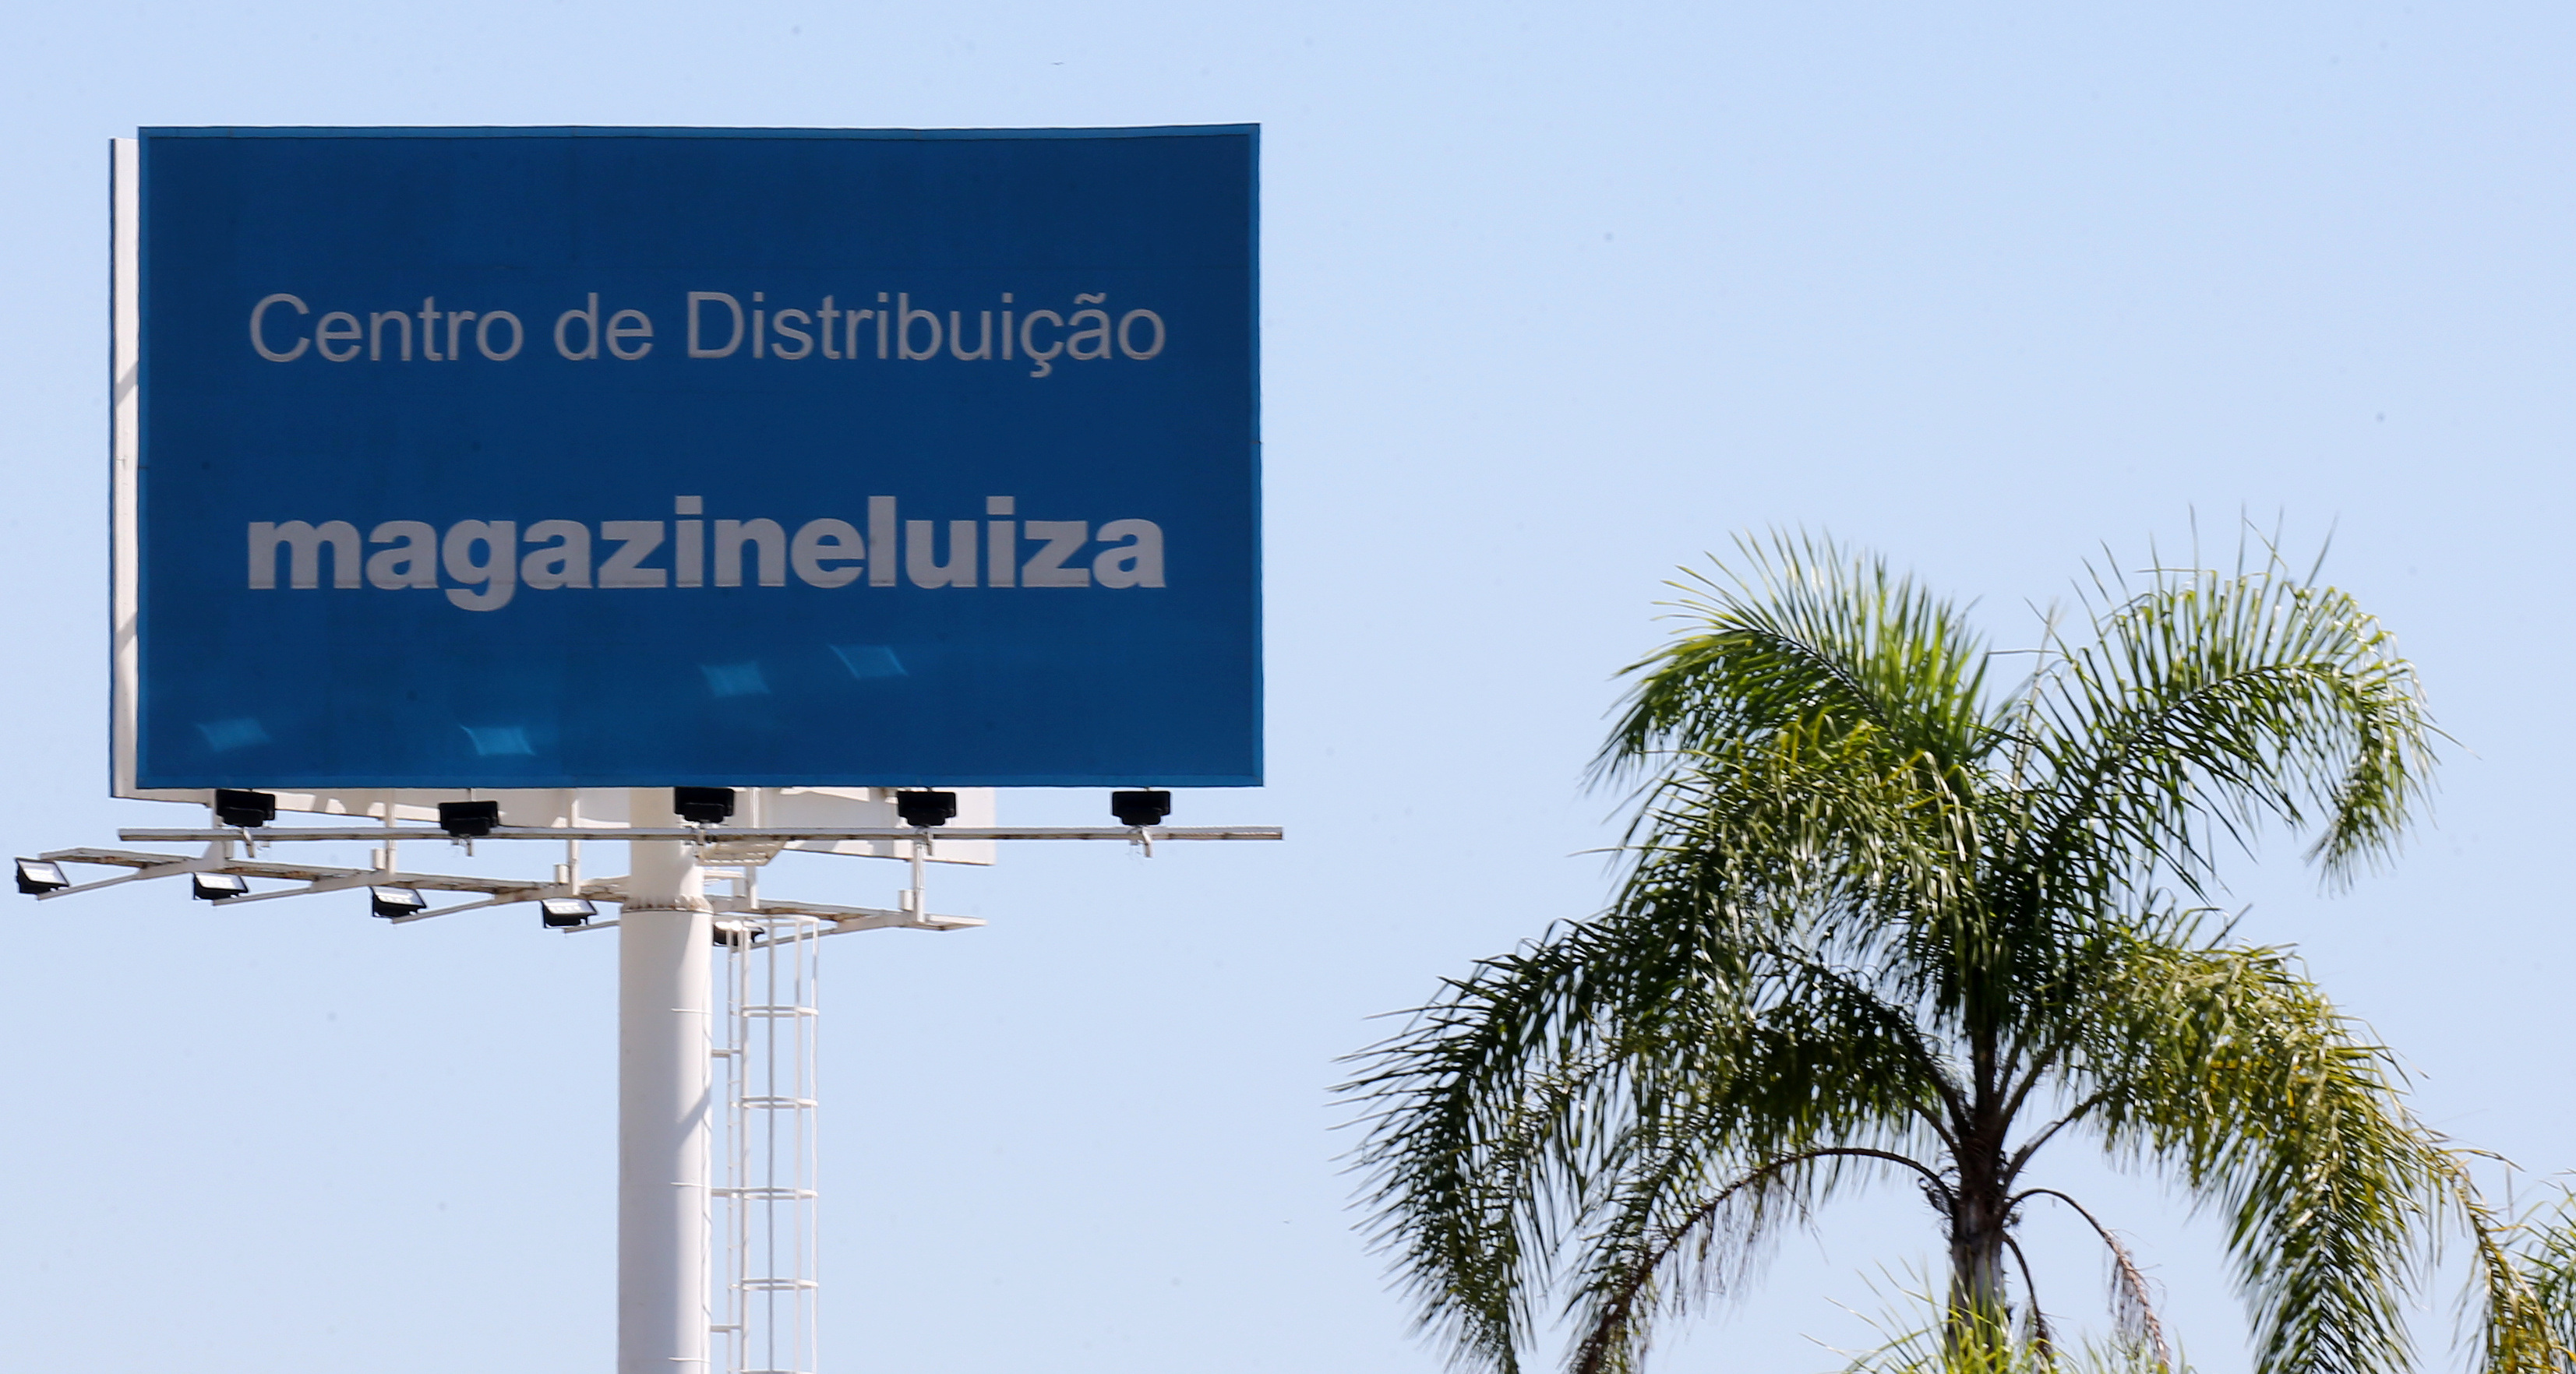 The logo of retail Magazine Luiza S.A. is seen in their logistics center in Louveira